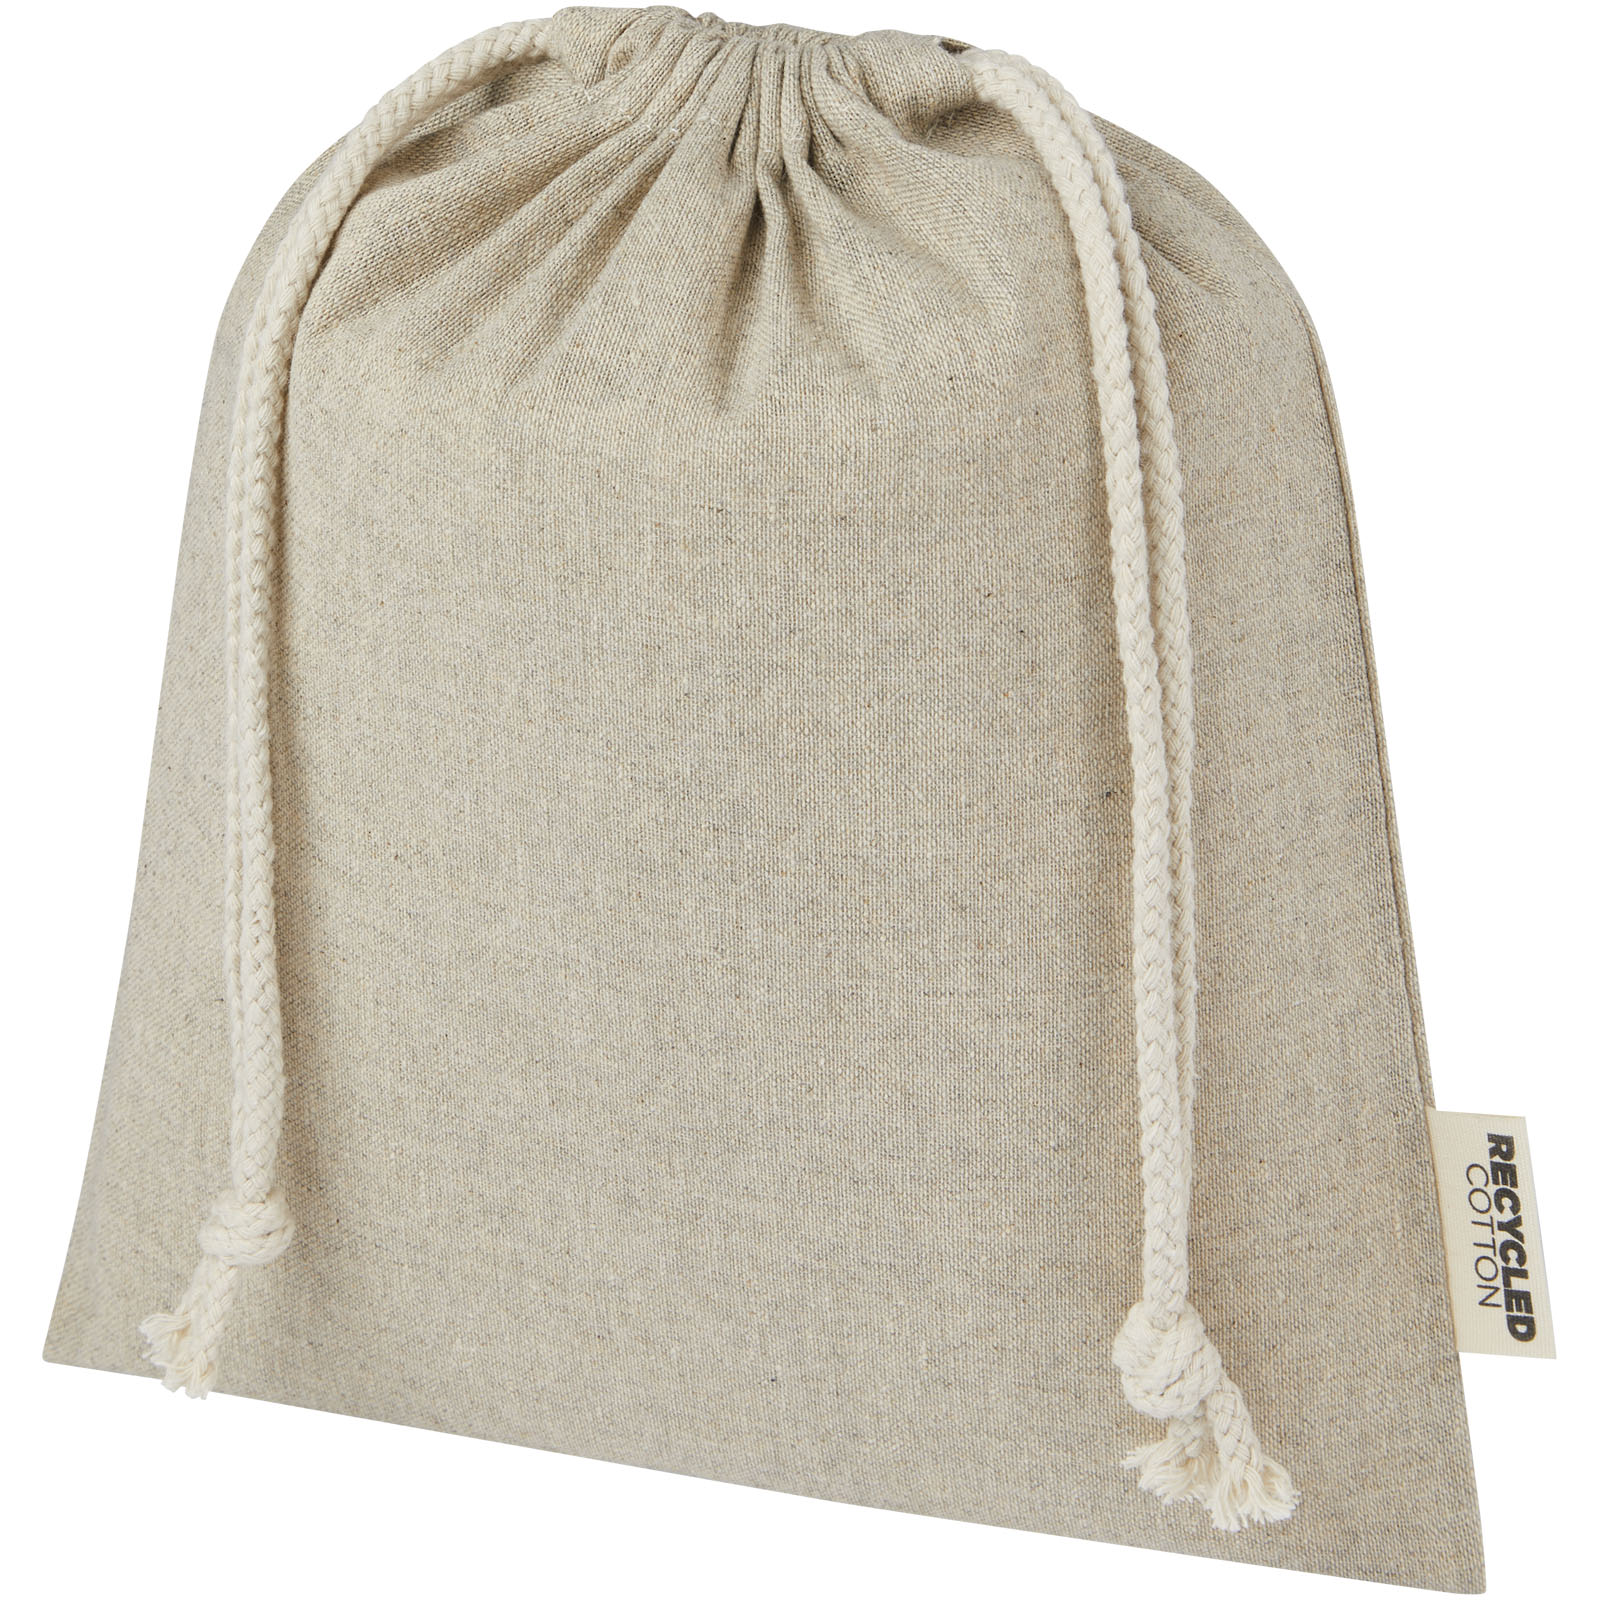 Advertising Cotton Bags - Pheebs 150 g/m² GRS recycled cotton gift bag medium 1.5L